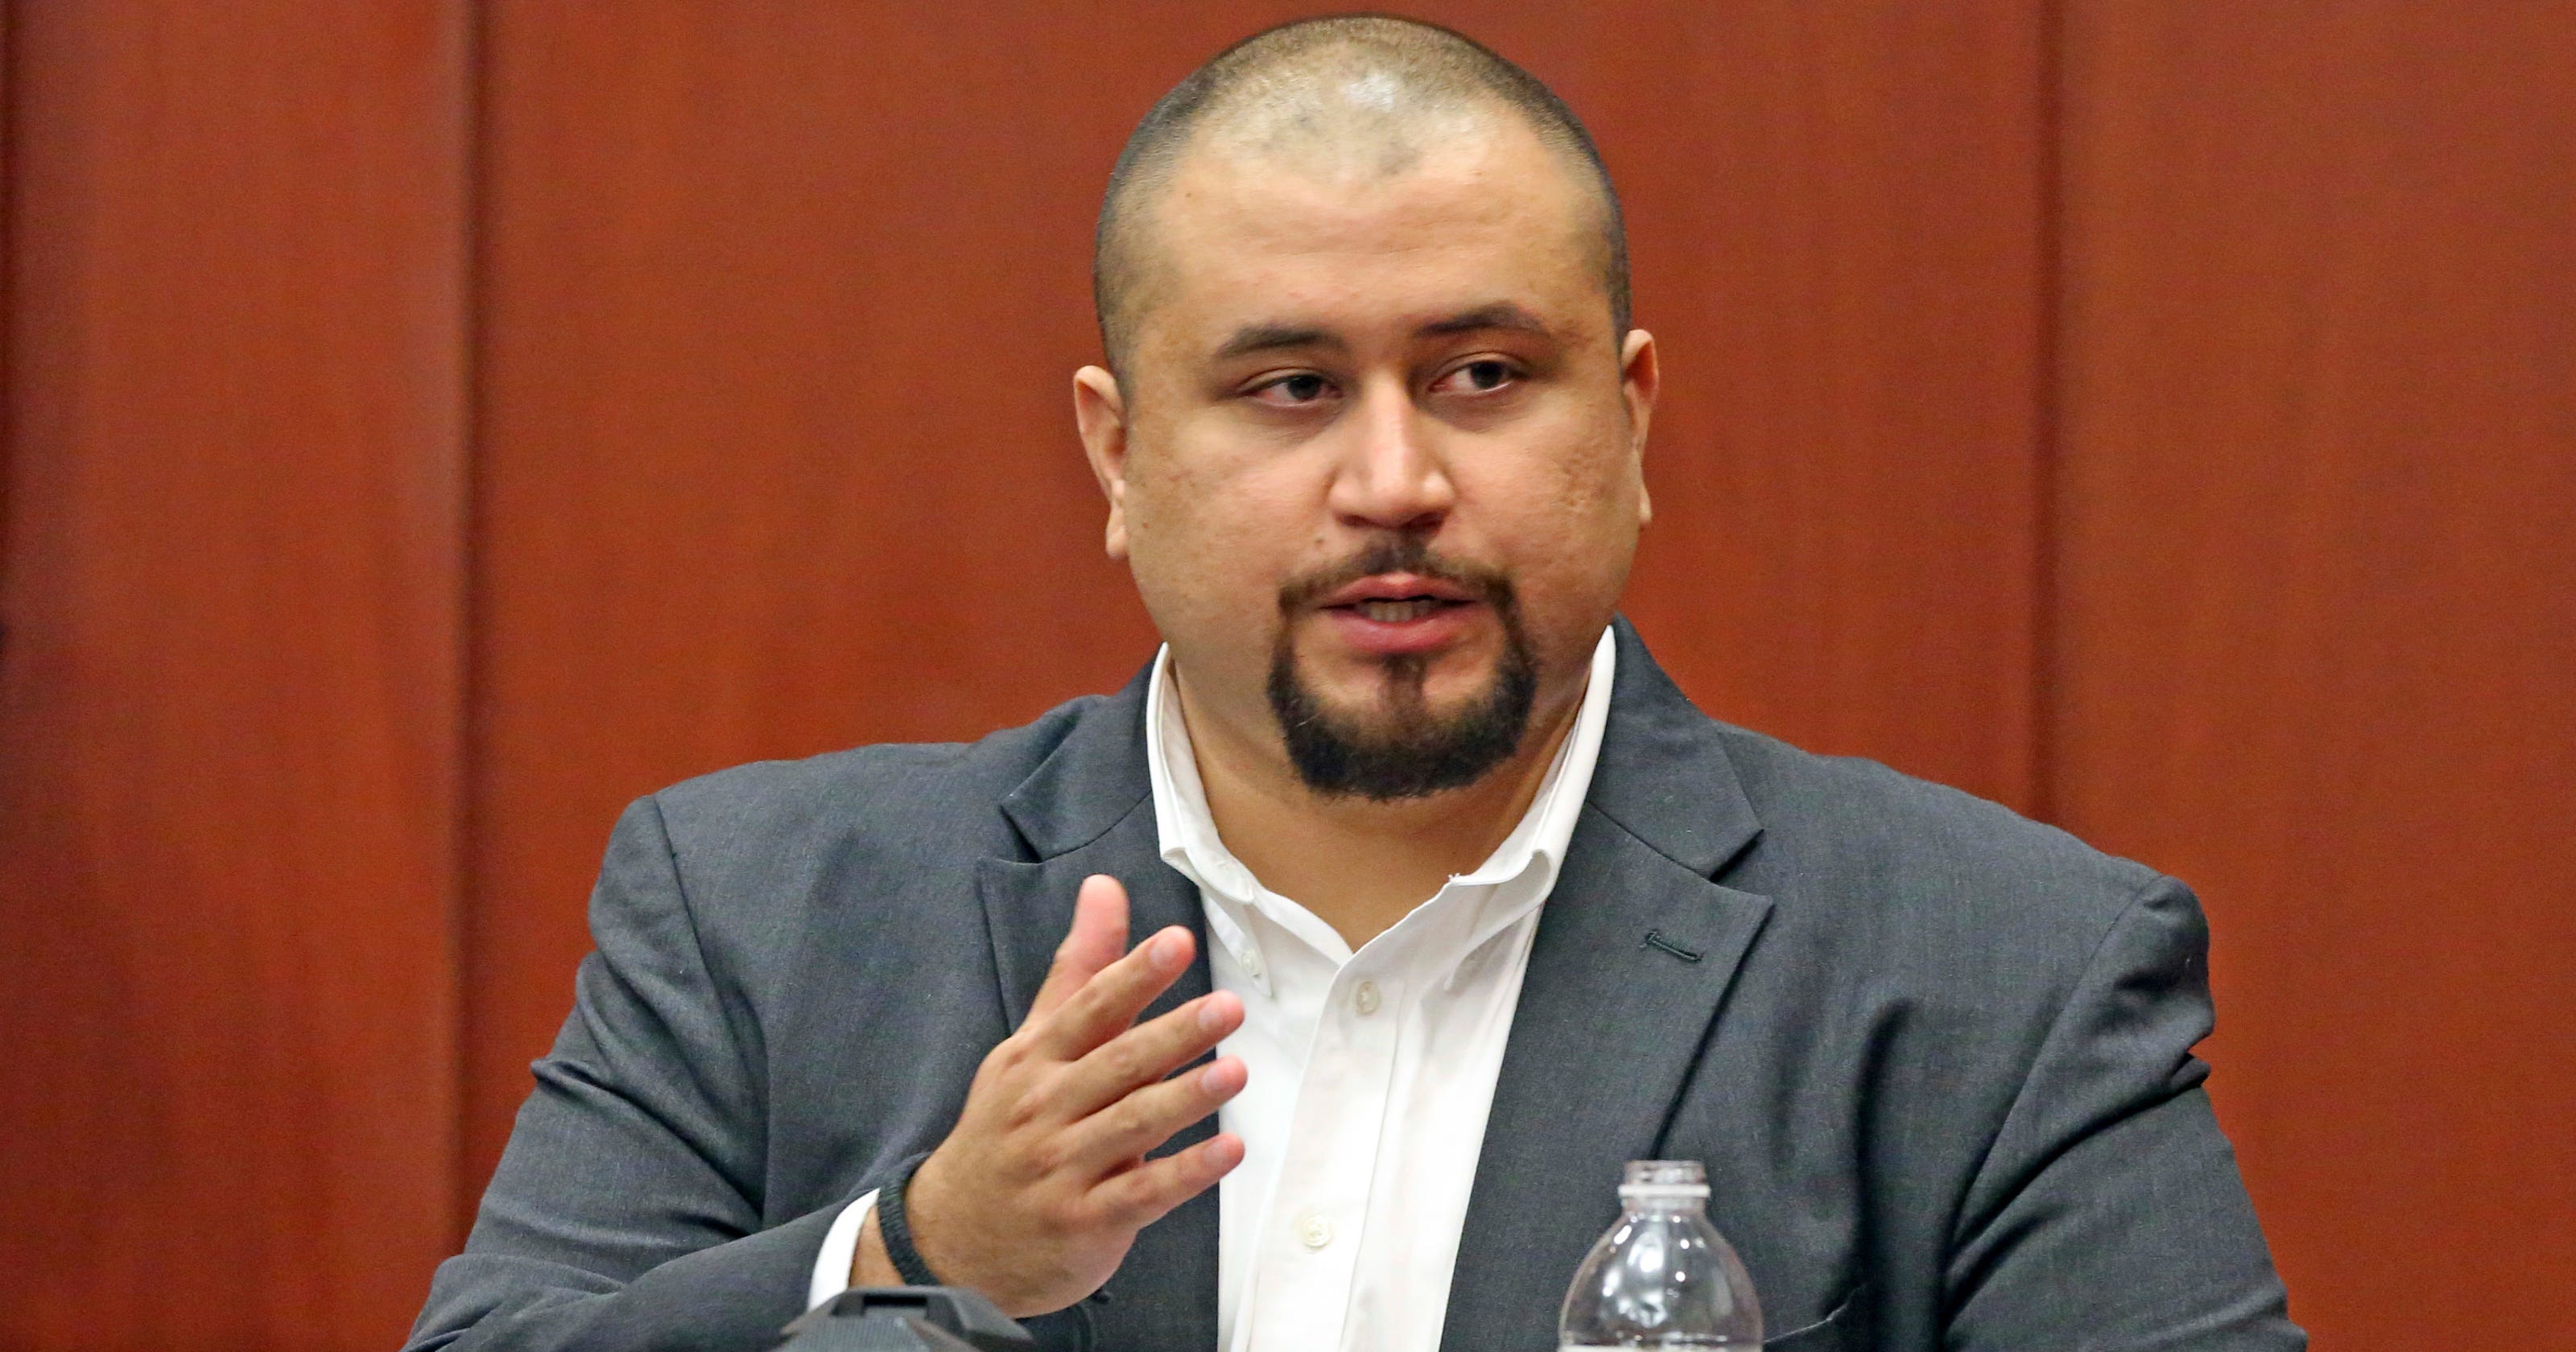 George Zimmerman pleads no contest in stalking case linked to Jay Z